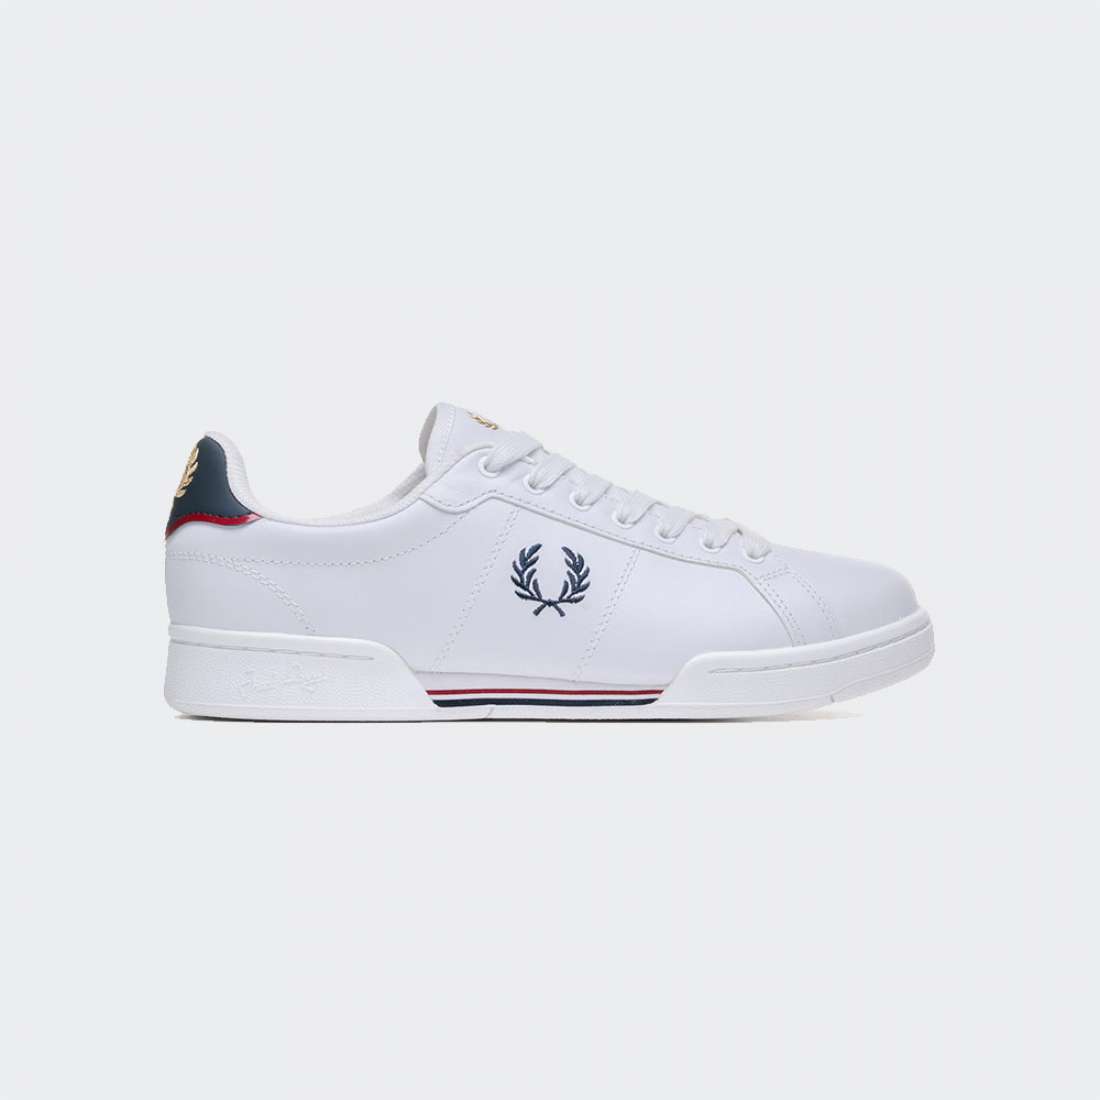 FRED PERRY B722 567